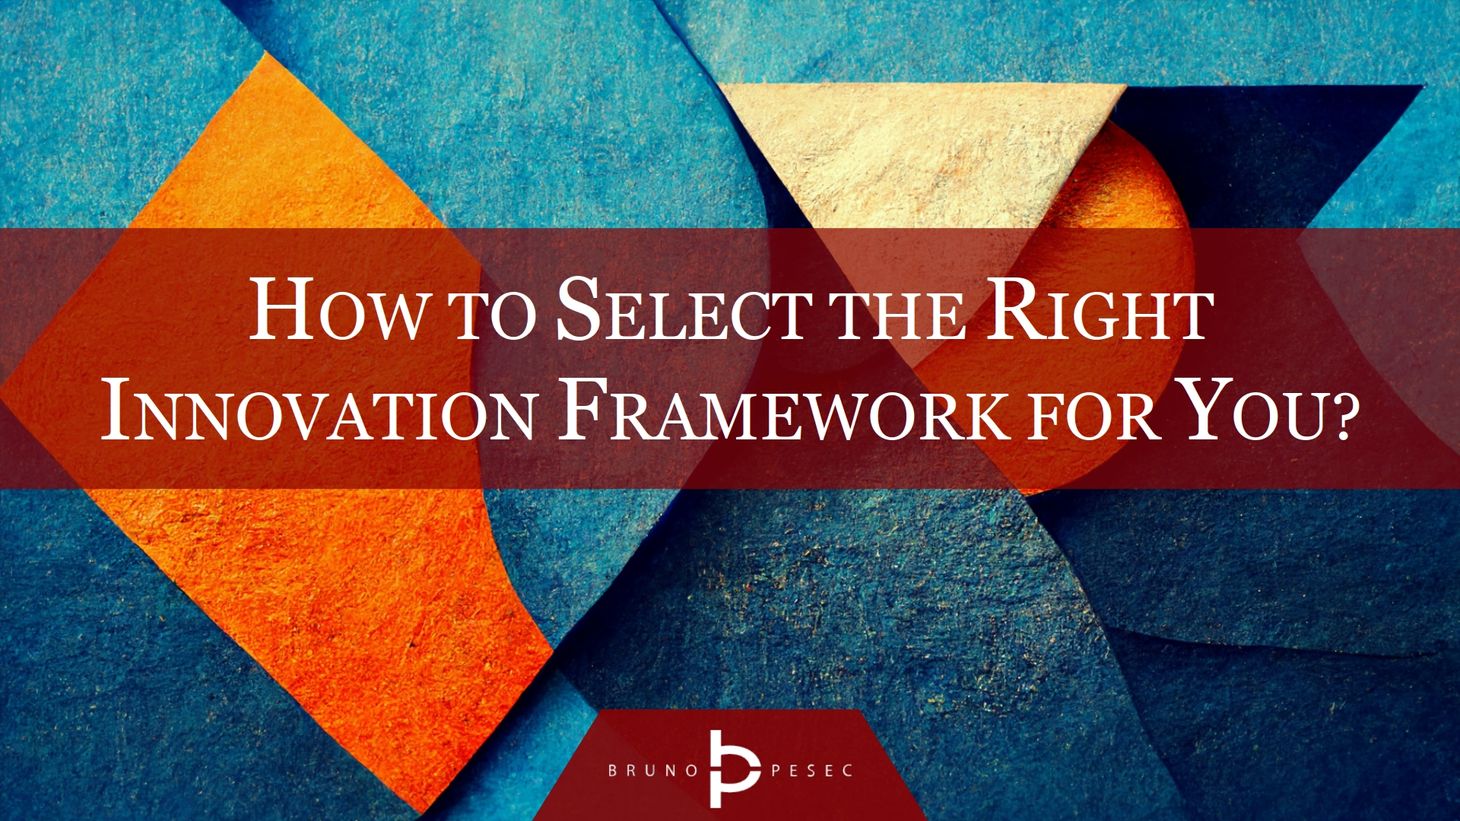 How to select the right innovation framework for you?